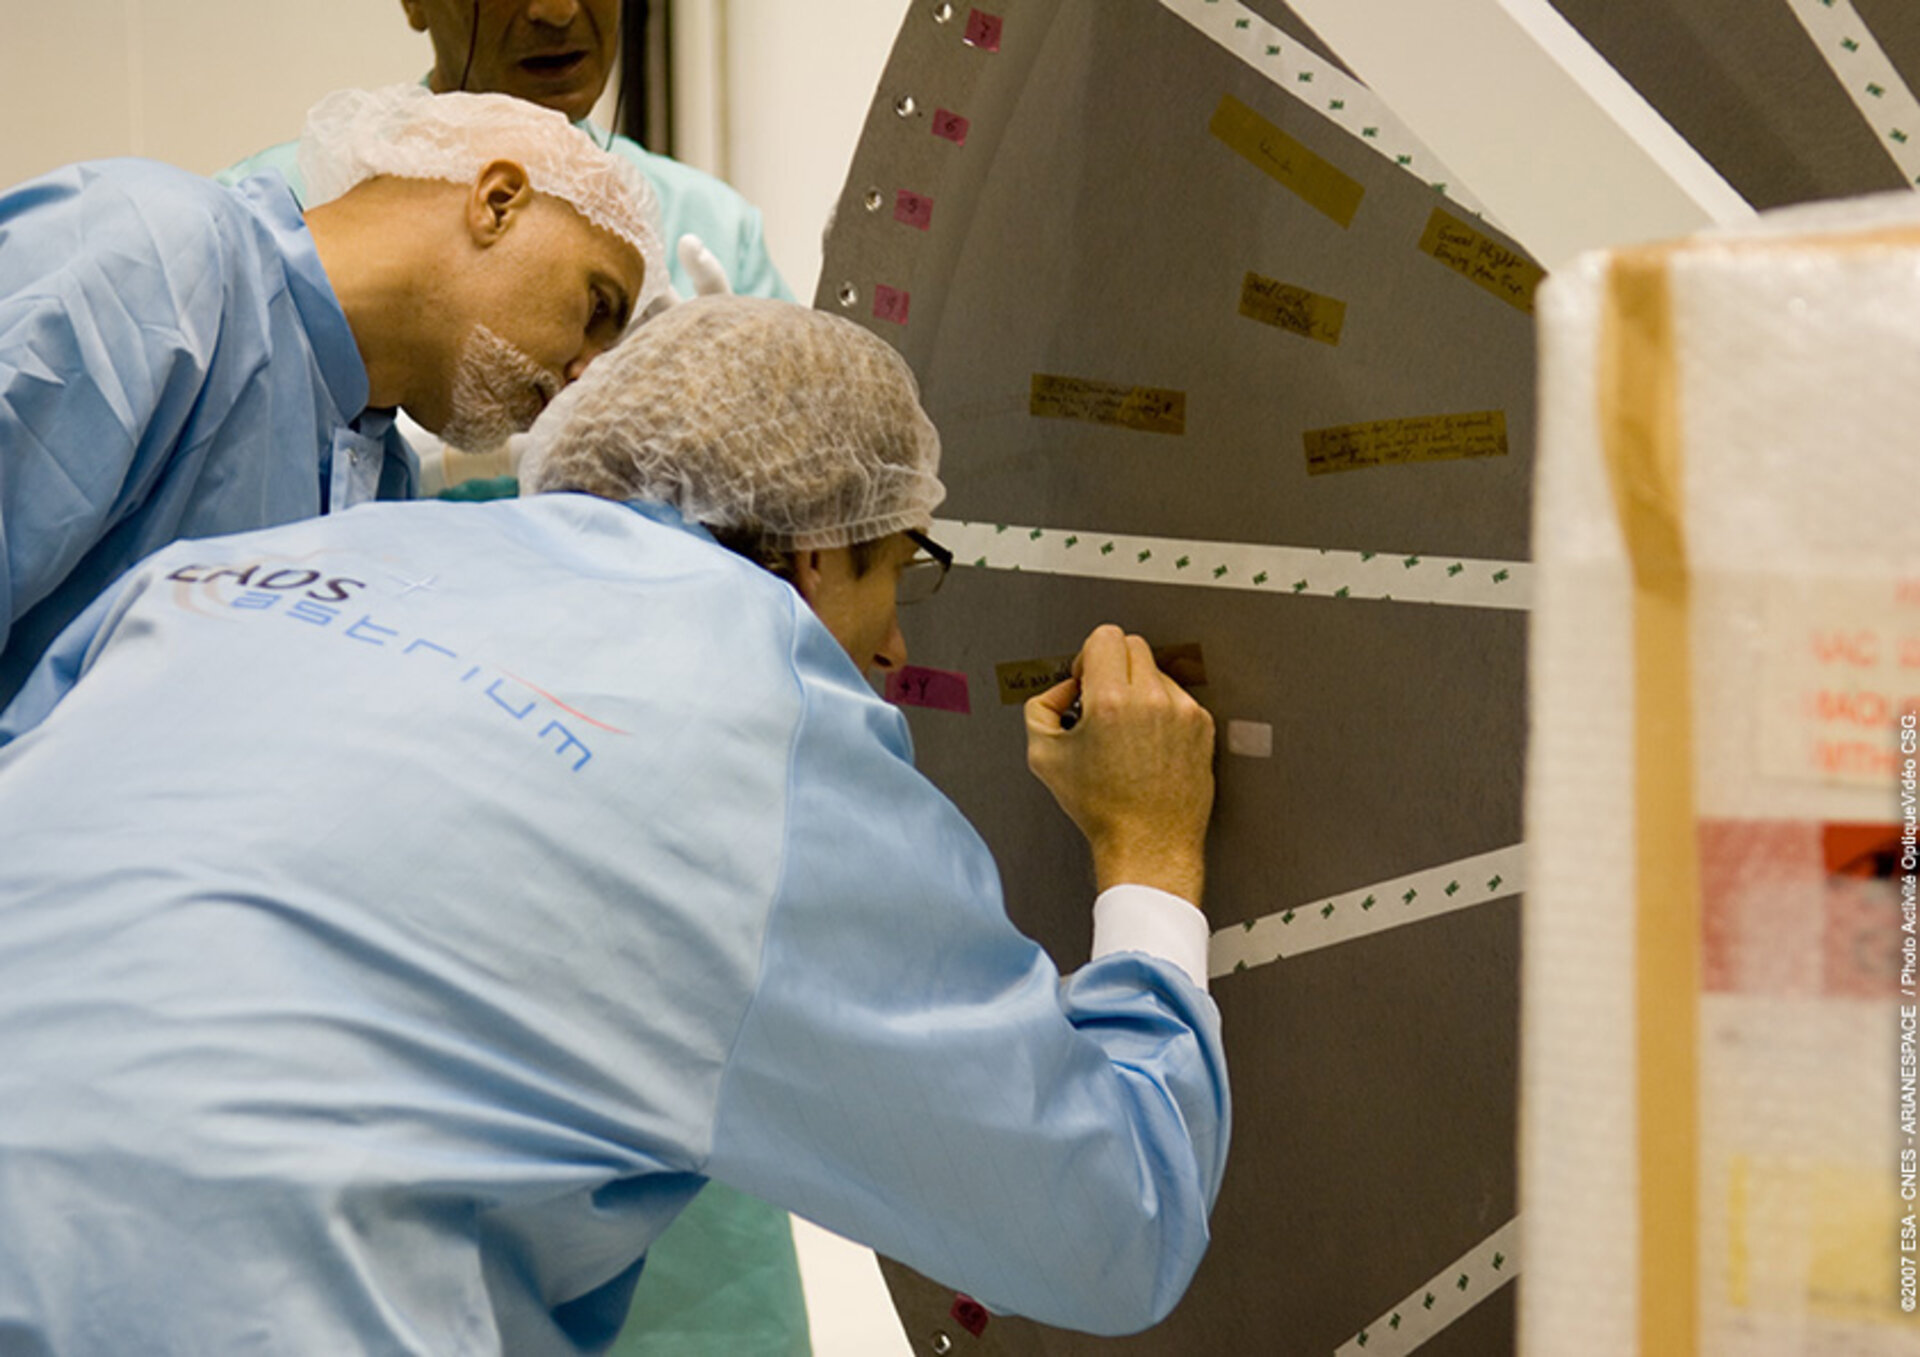 Project team members write messages on the Integrated Cargo Carrier cover